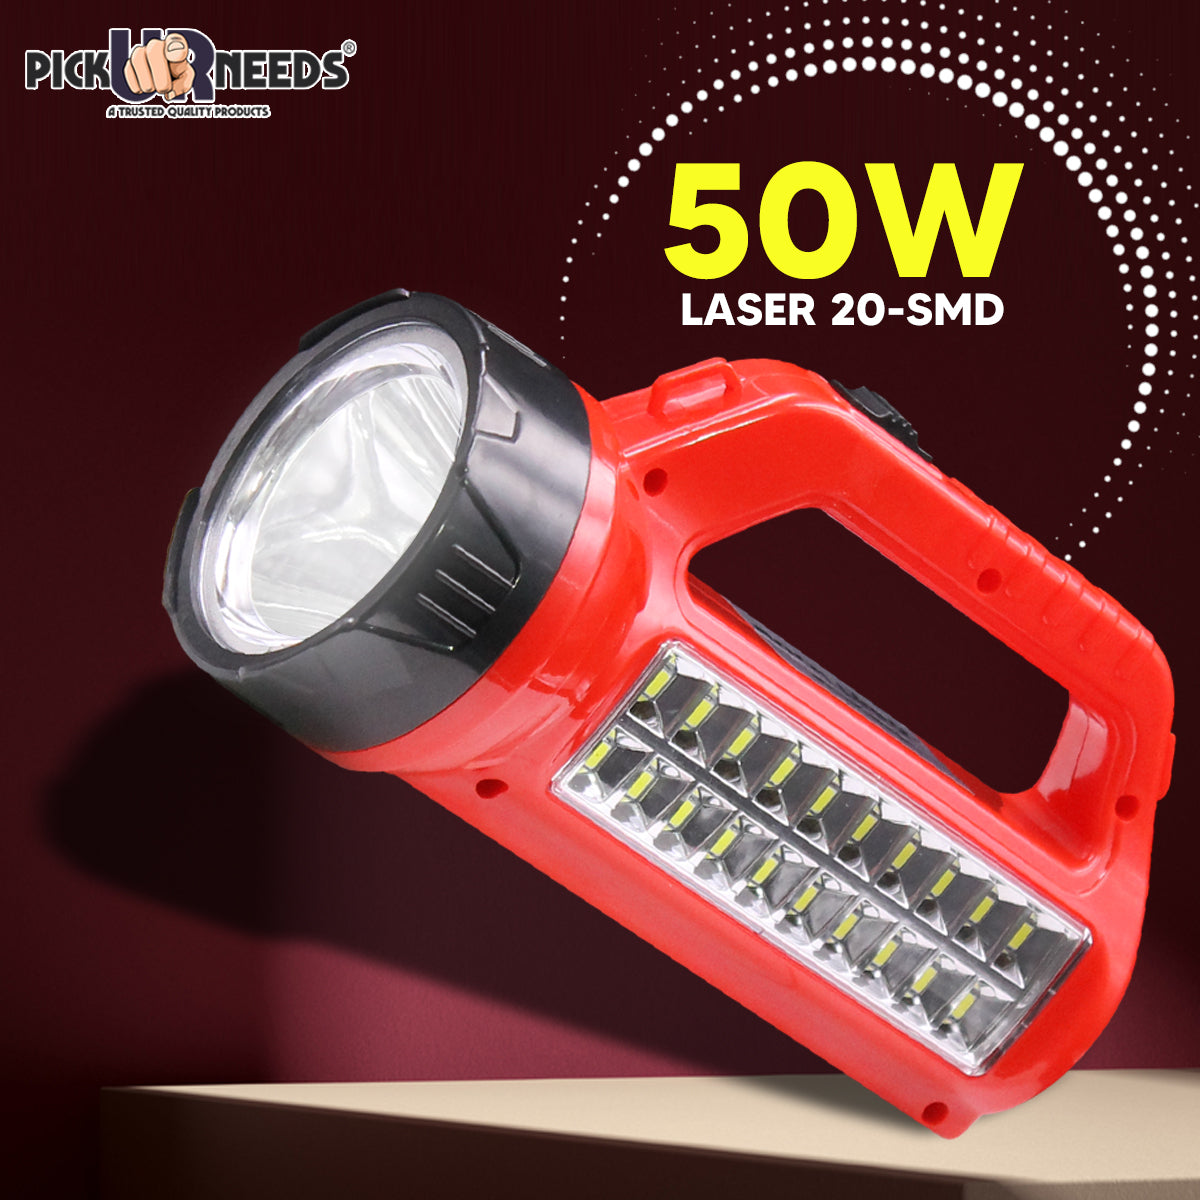 Pick Ur Needs® Bright LED Rechargeable Flashlight 50W + 20 SMD Side Handheld with Eco Friendly Solar Panel (3W+9V)